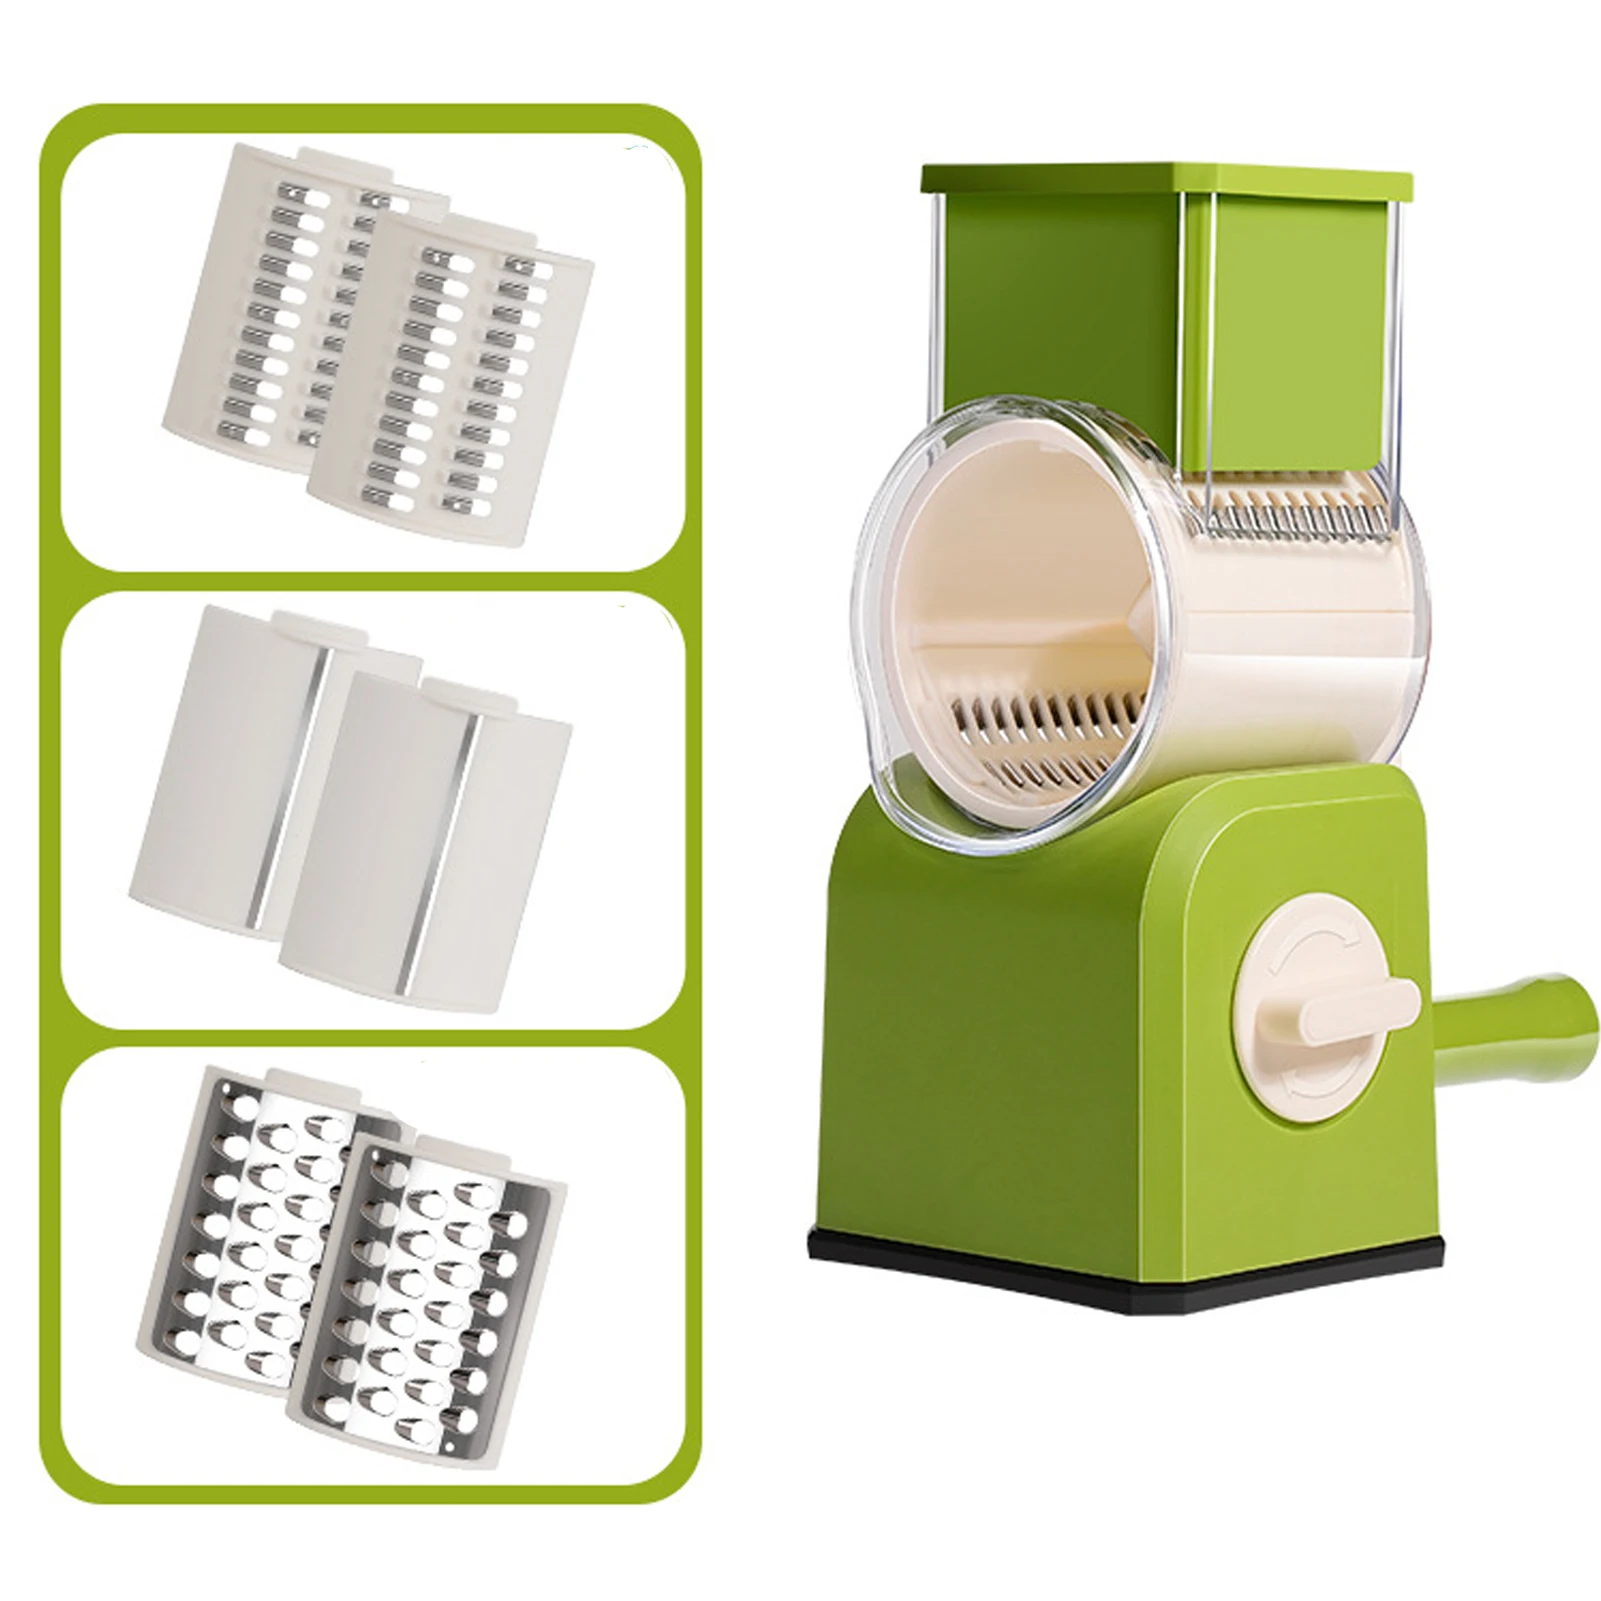 

Handheld Vegetables Slicer Cheese Shredder with Suction Base,Durable Food Chopper Tools Kitchen Gadgets for Potato Onion Tomato